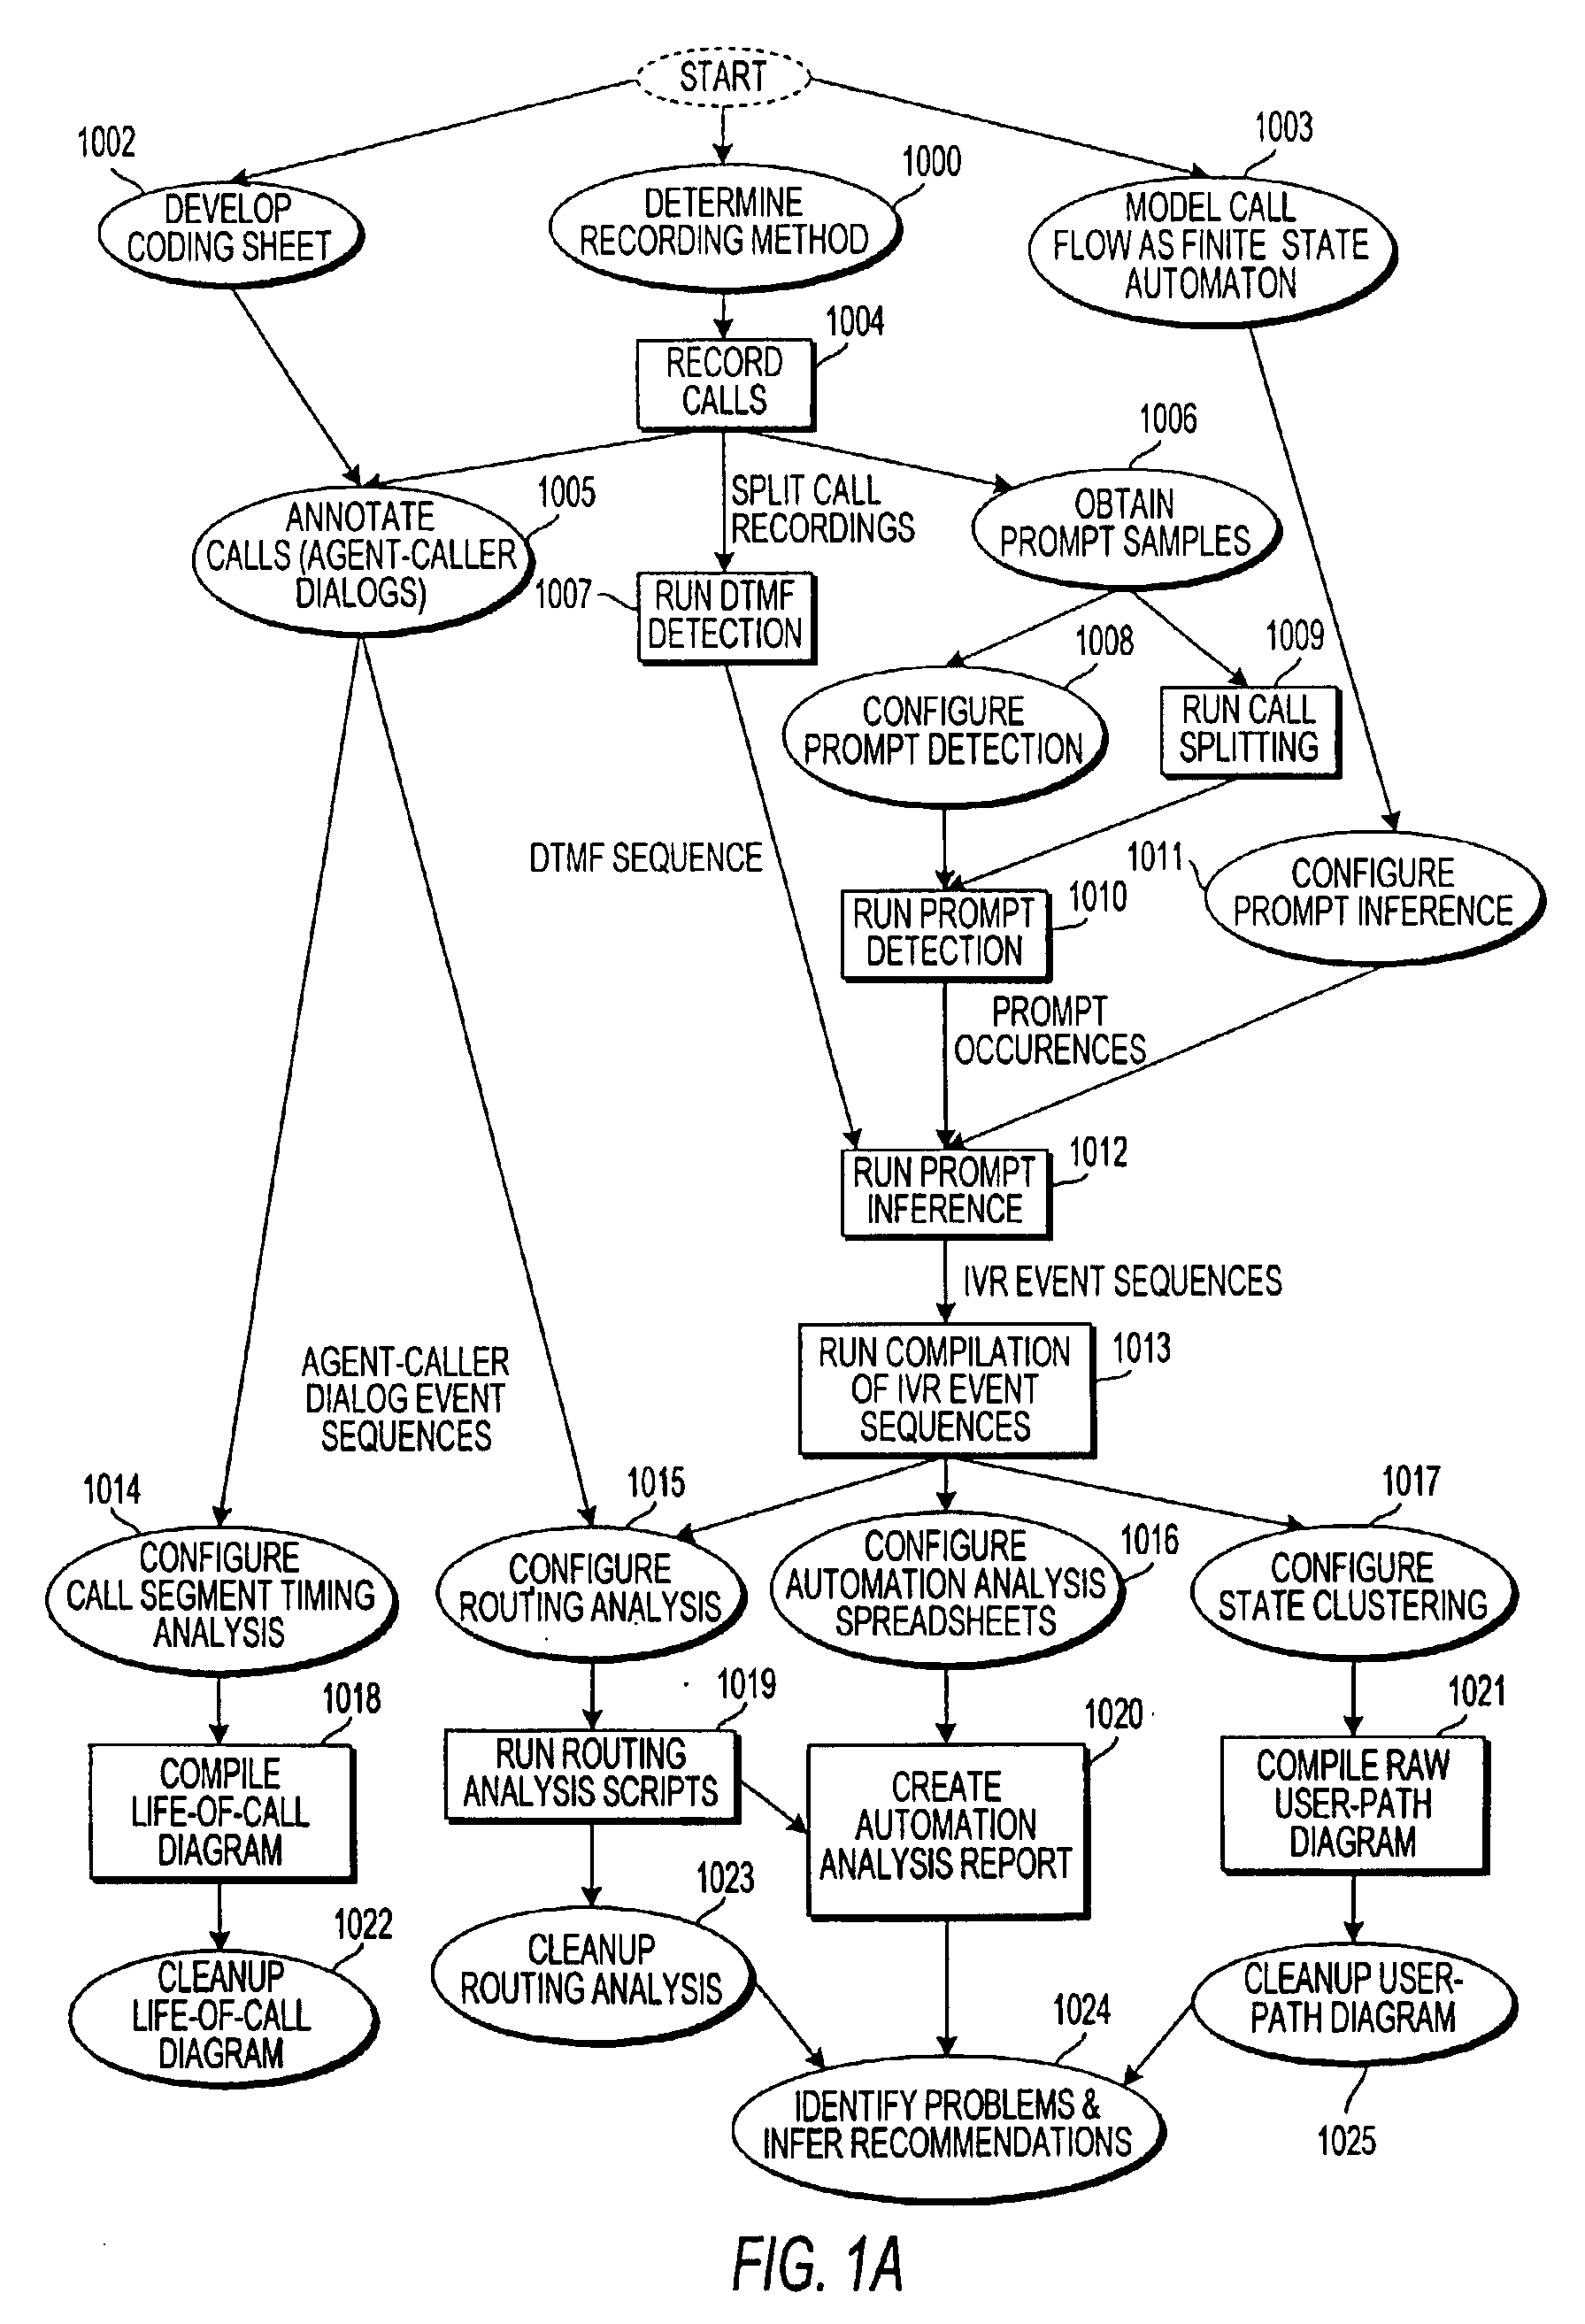 Apparatus and method for analyzing routing of calls in an automated response system